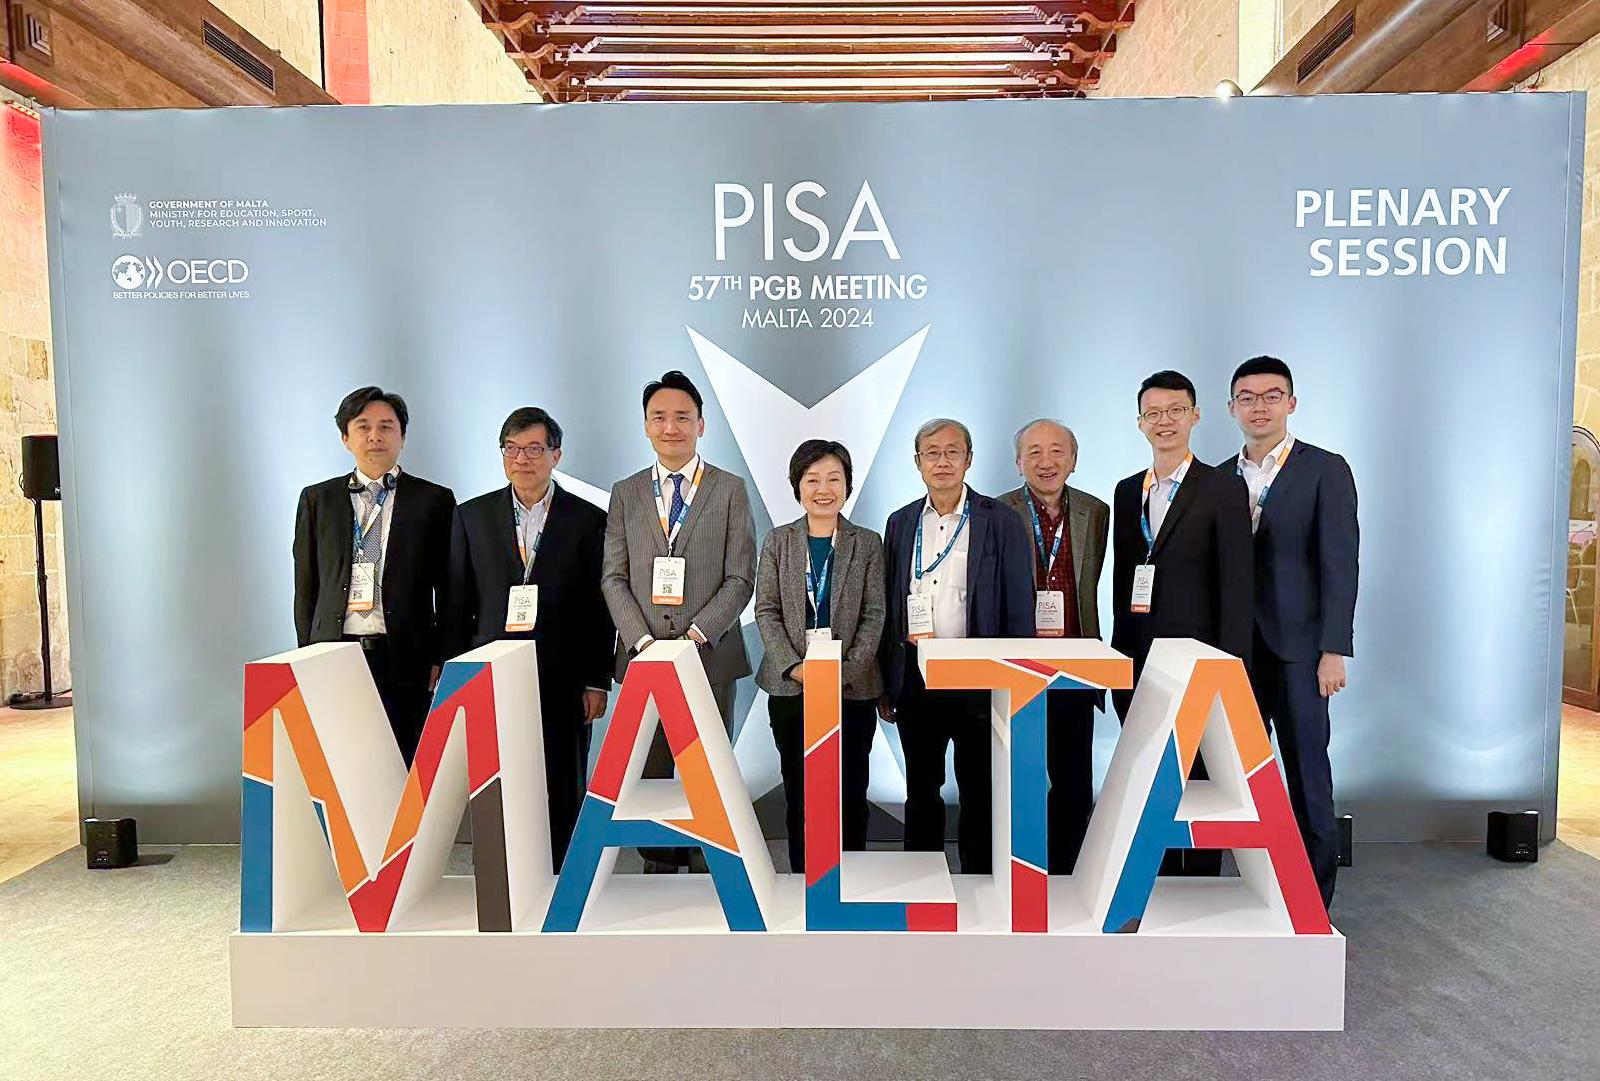 The Secretary for Education, Dr Choi Yuk-lin, attended the Programme for International Student Assessment Governing Board Meeting organised by the Organisation for Economic Co-operation and Development in Malta from April 17 to 19 (Malta time). Photo shows Dr Choi (fourth left), the Director of the Education and Youth Affairs Bureau of the Macao Special Administrative Region Government, Mr Kong Chi-meng (third left), and other members of the Hong Kong and Macao delegations.